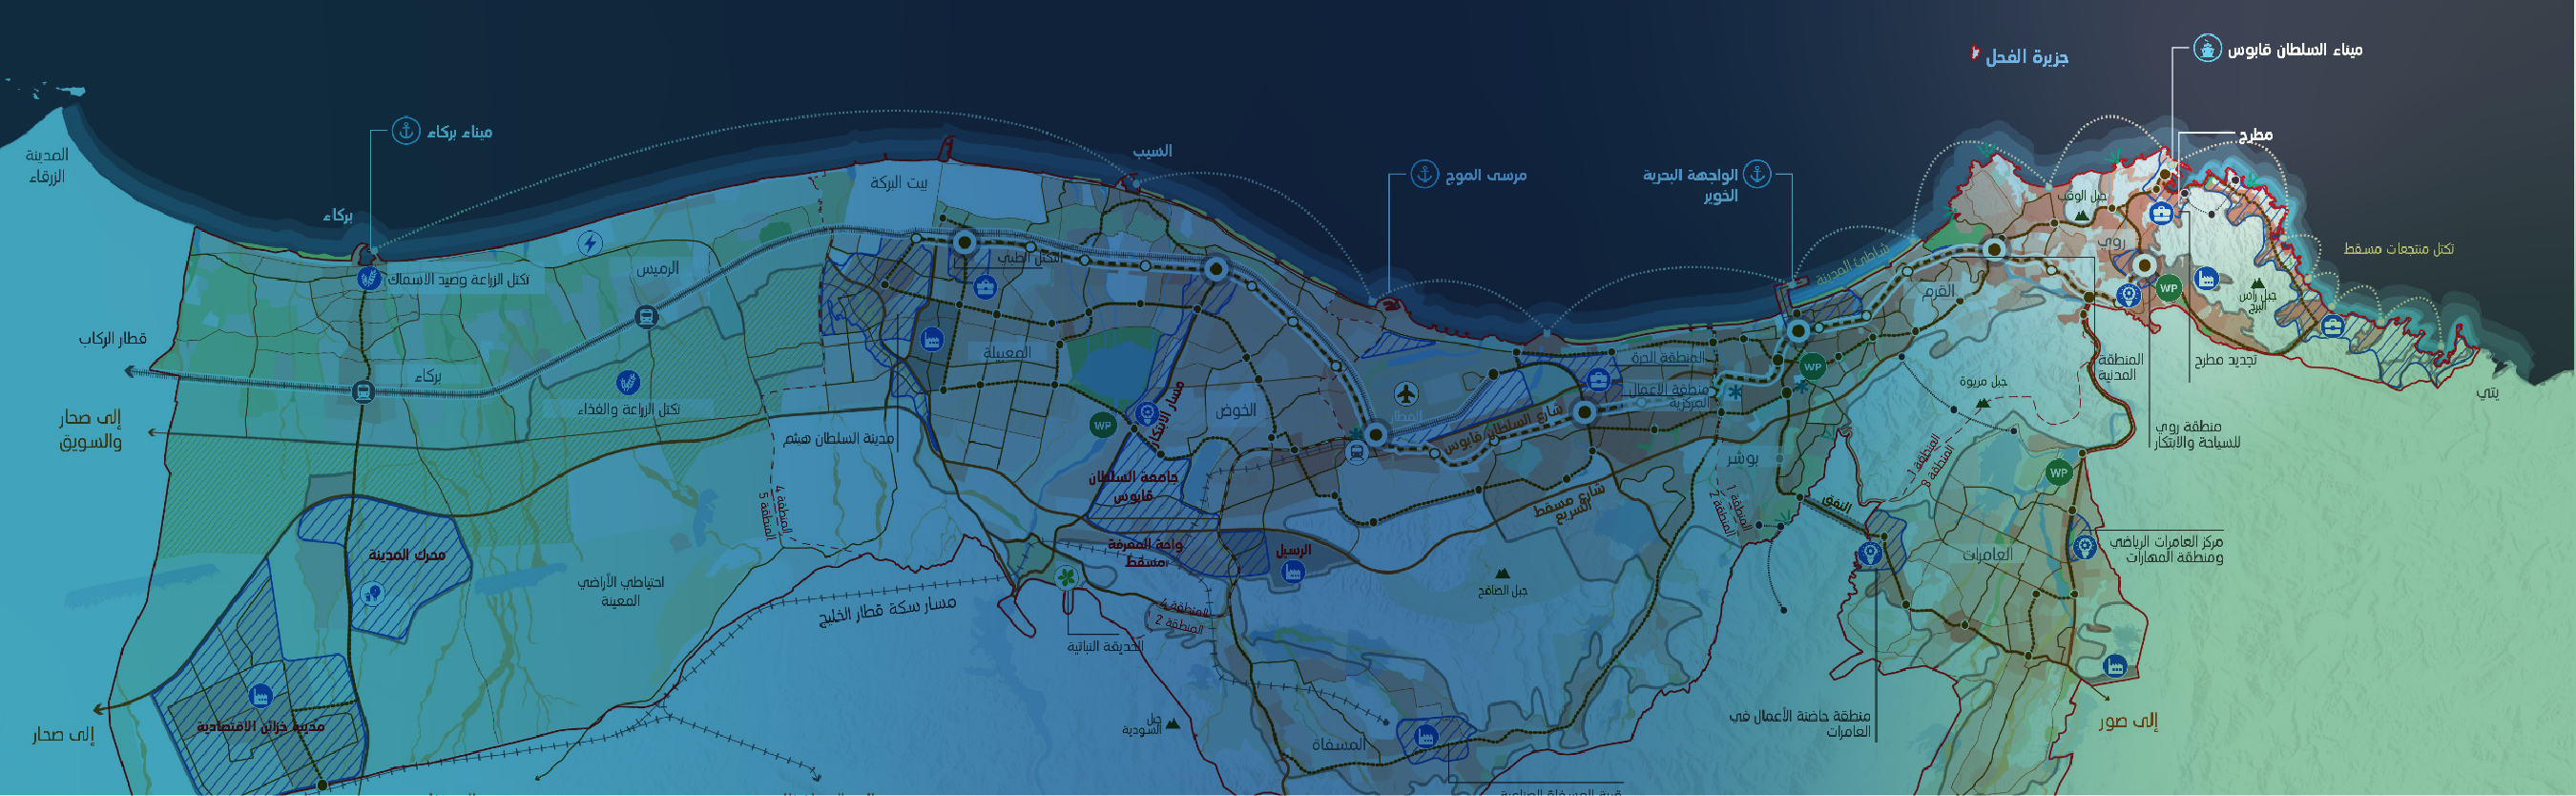 A Vision for Muscat 2040: The Greater Muscat Structure Plan